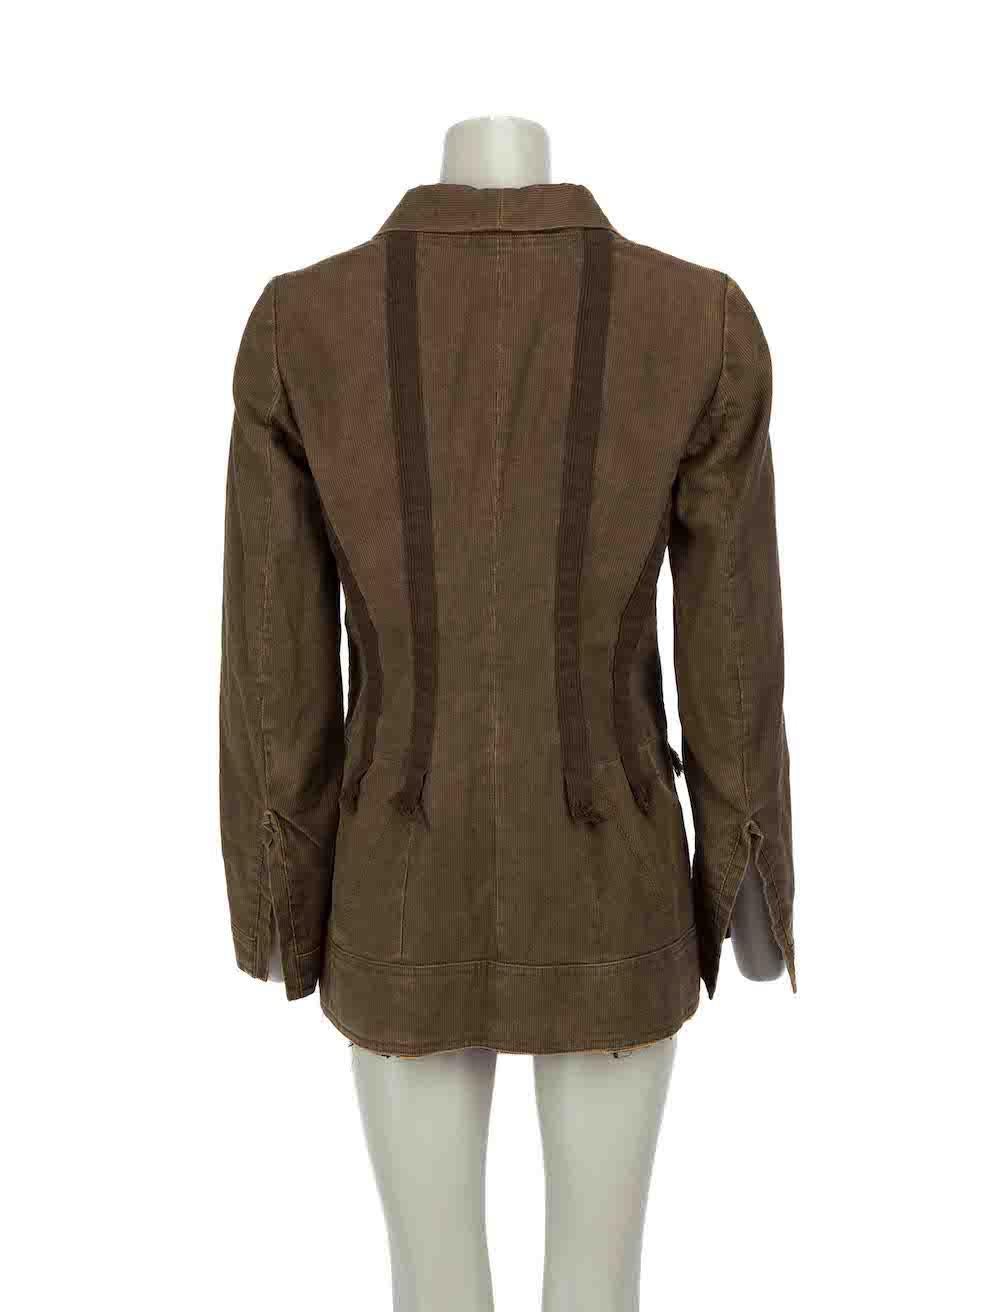 Dries Van Noten Khaki Corduroy Tied Jacket Size L In Excellent Condition For Sale In London, GB